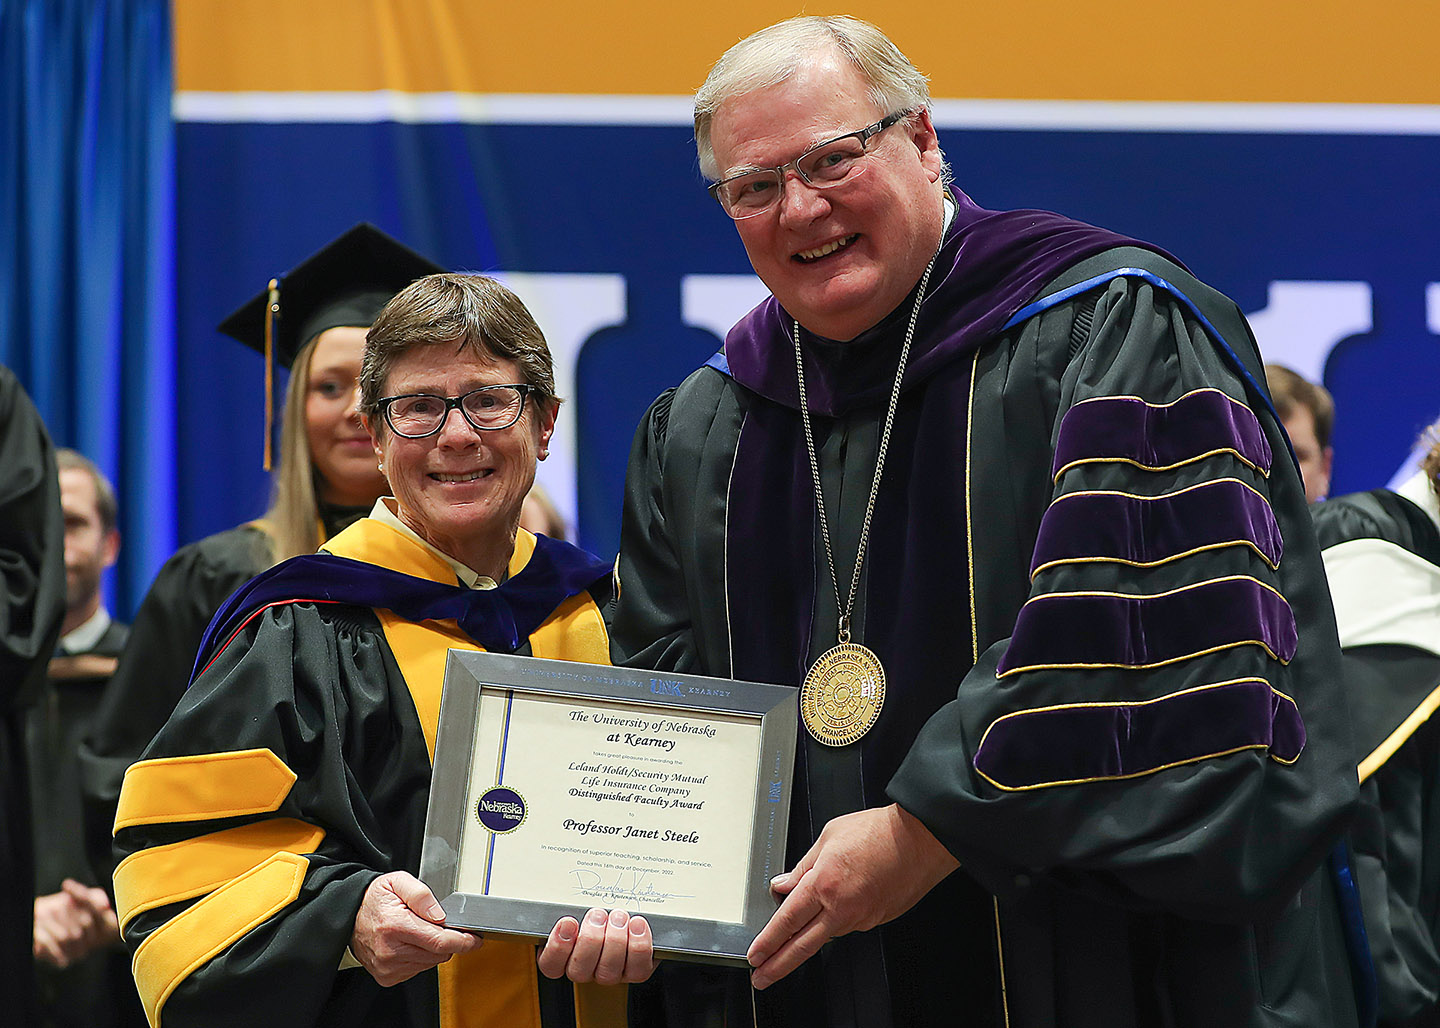 UNC Chancellor Doug Kristensen (right) presents the Leland Holdt/Security Mutual Life Distinguished Faculty Award to biology professor Janet Steele during Friday's winter celebration at the on-campus Health and Athletic Center.  (Photos by Erika Pritchard, UNK Communications)